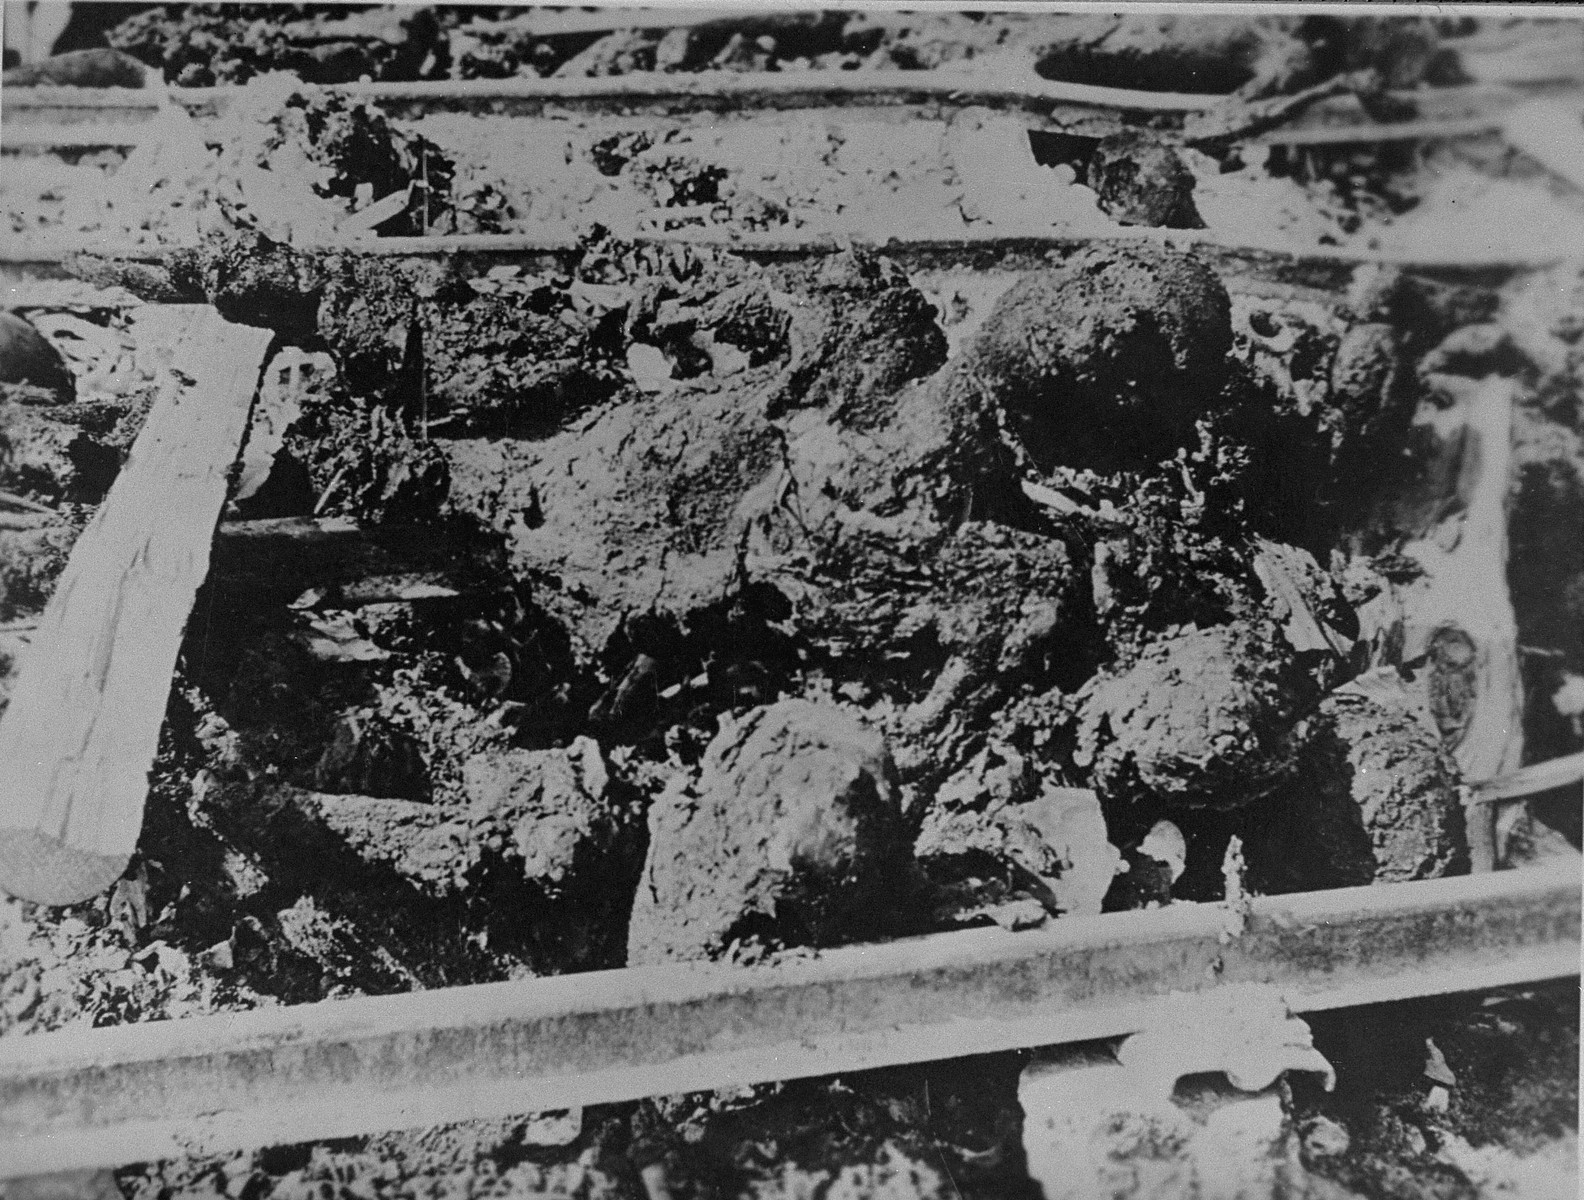 Partially burned corpses left by the hastily retreating Nazis.